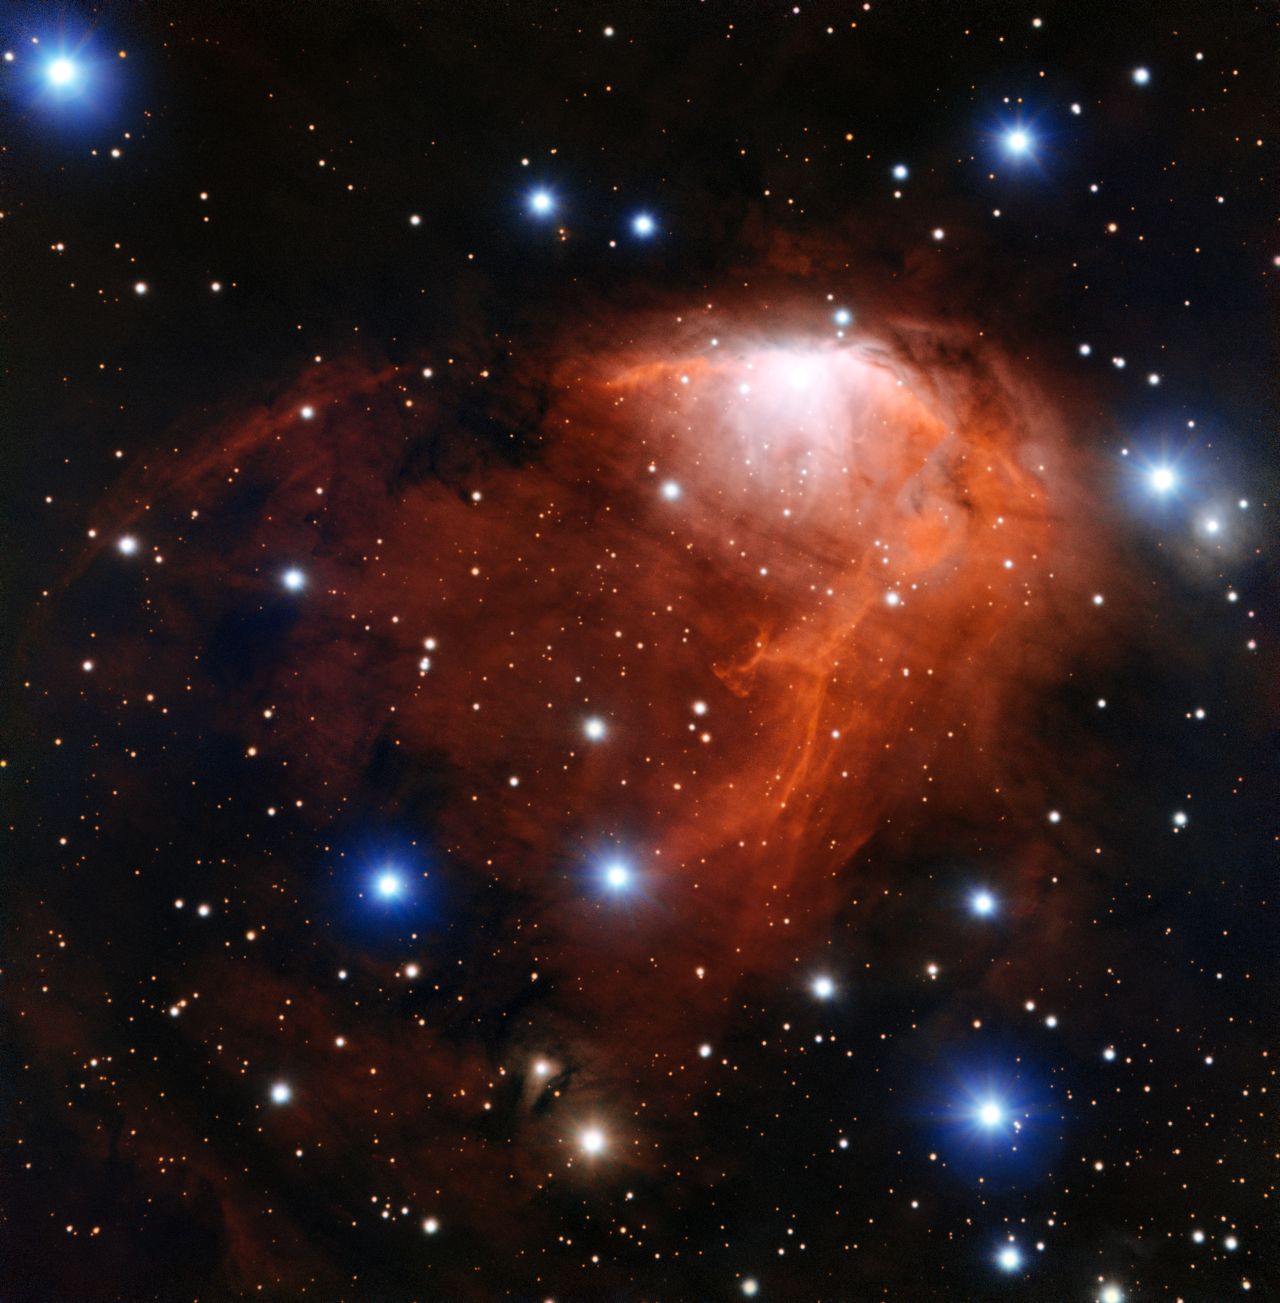 This nebula, or cloud of gas and dust, is called RCW 34 or Gum 19. The brightest areas you can see are where the gas is being heated by young stars. Eventually the gas burst outward like champagne after a bottle is uncorked. Scientists call this champagne flow. This new image of the nebula was captured by the European Space Organization's Very Large Telescope in Chile. RCW 34 is in the constellation Vela in the southern sky. The name means "sails of a ship" in Latin.